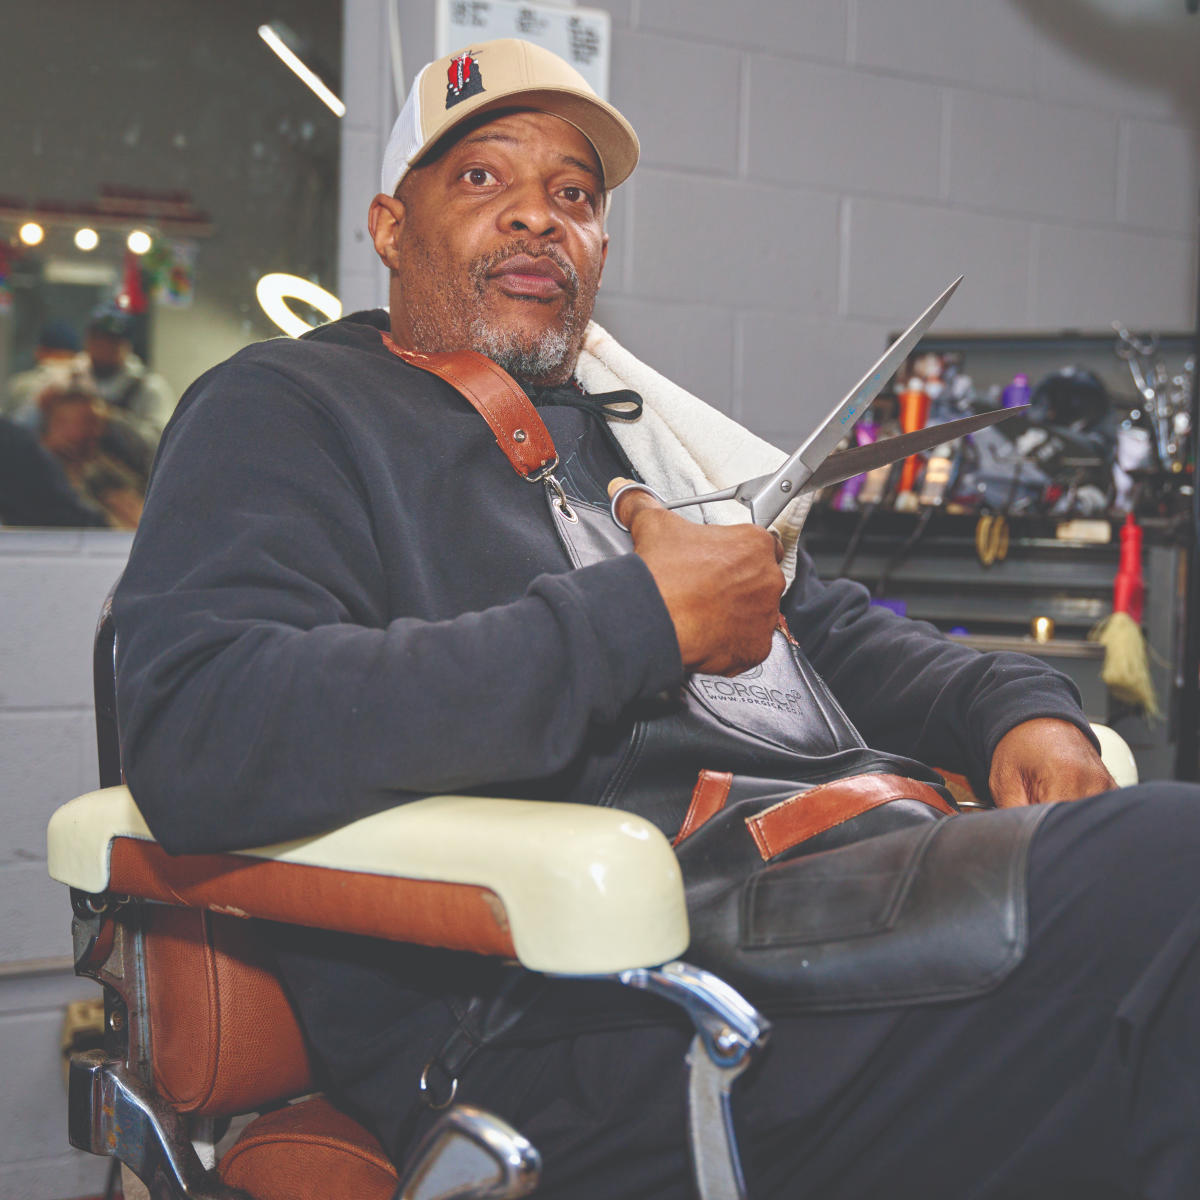 Tim Nelson "Nelly" at Waton's Barbershop in Lawrence Kansas